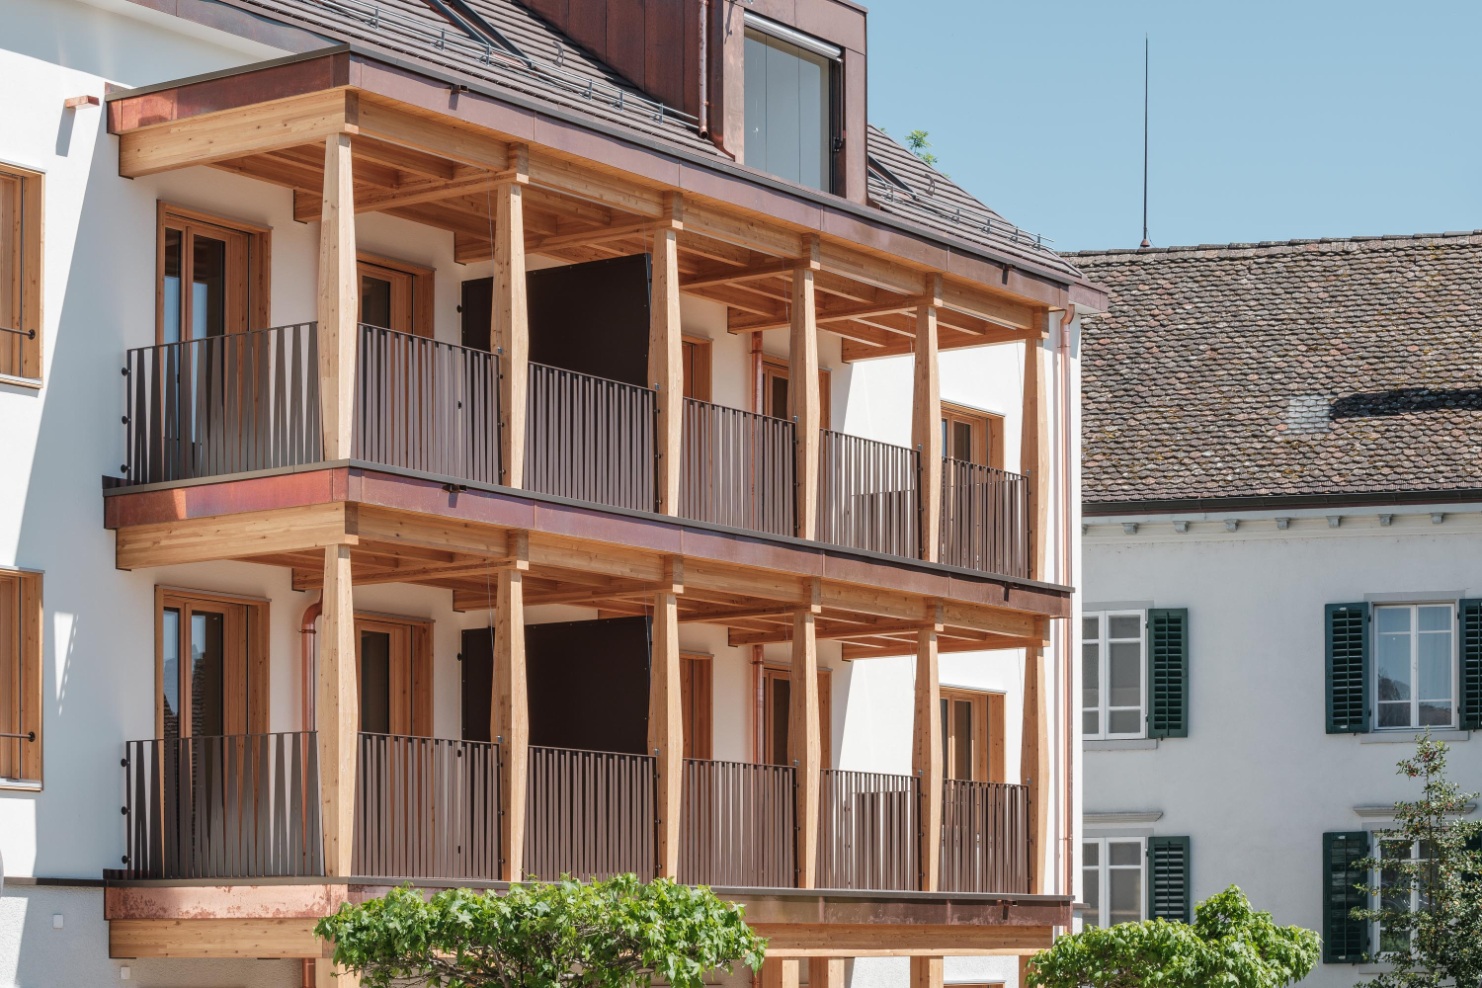 Building facade with a distinctive wooden balcony structure and roof dormer.